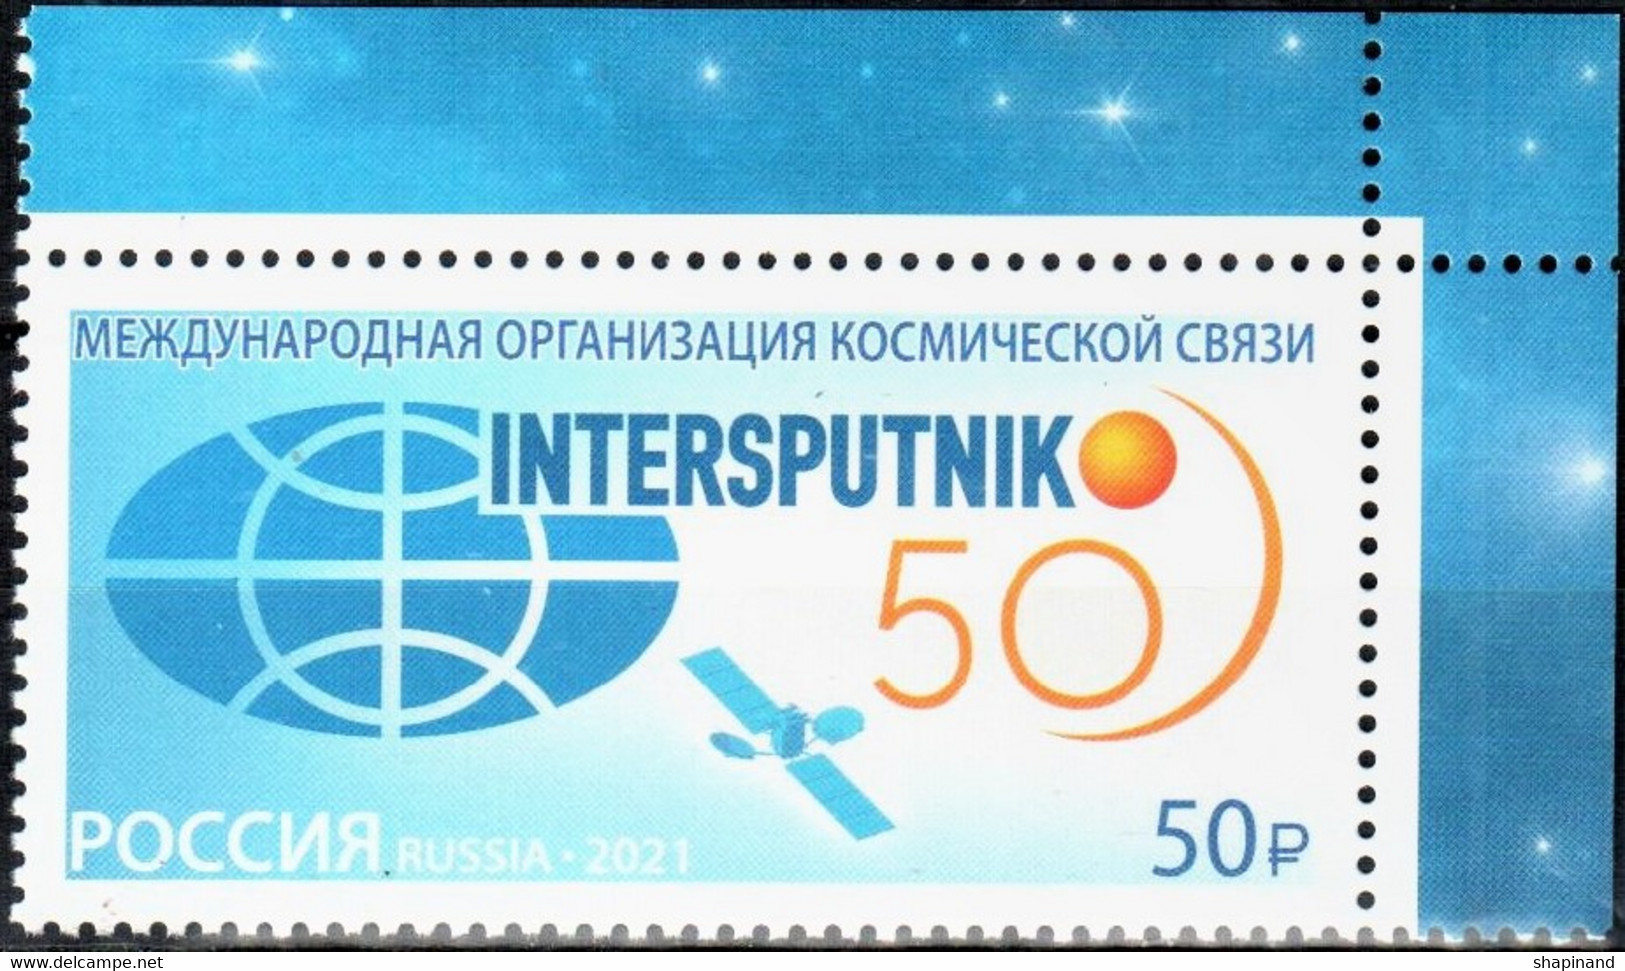 Russia 2021 "50th Anniversary Of The International Organization Of Space Communications "Intersputnik" 1v Quality:100% - Unused Stamps